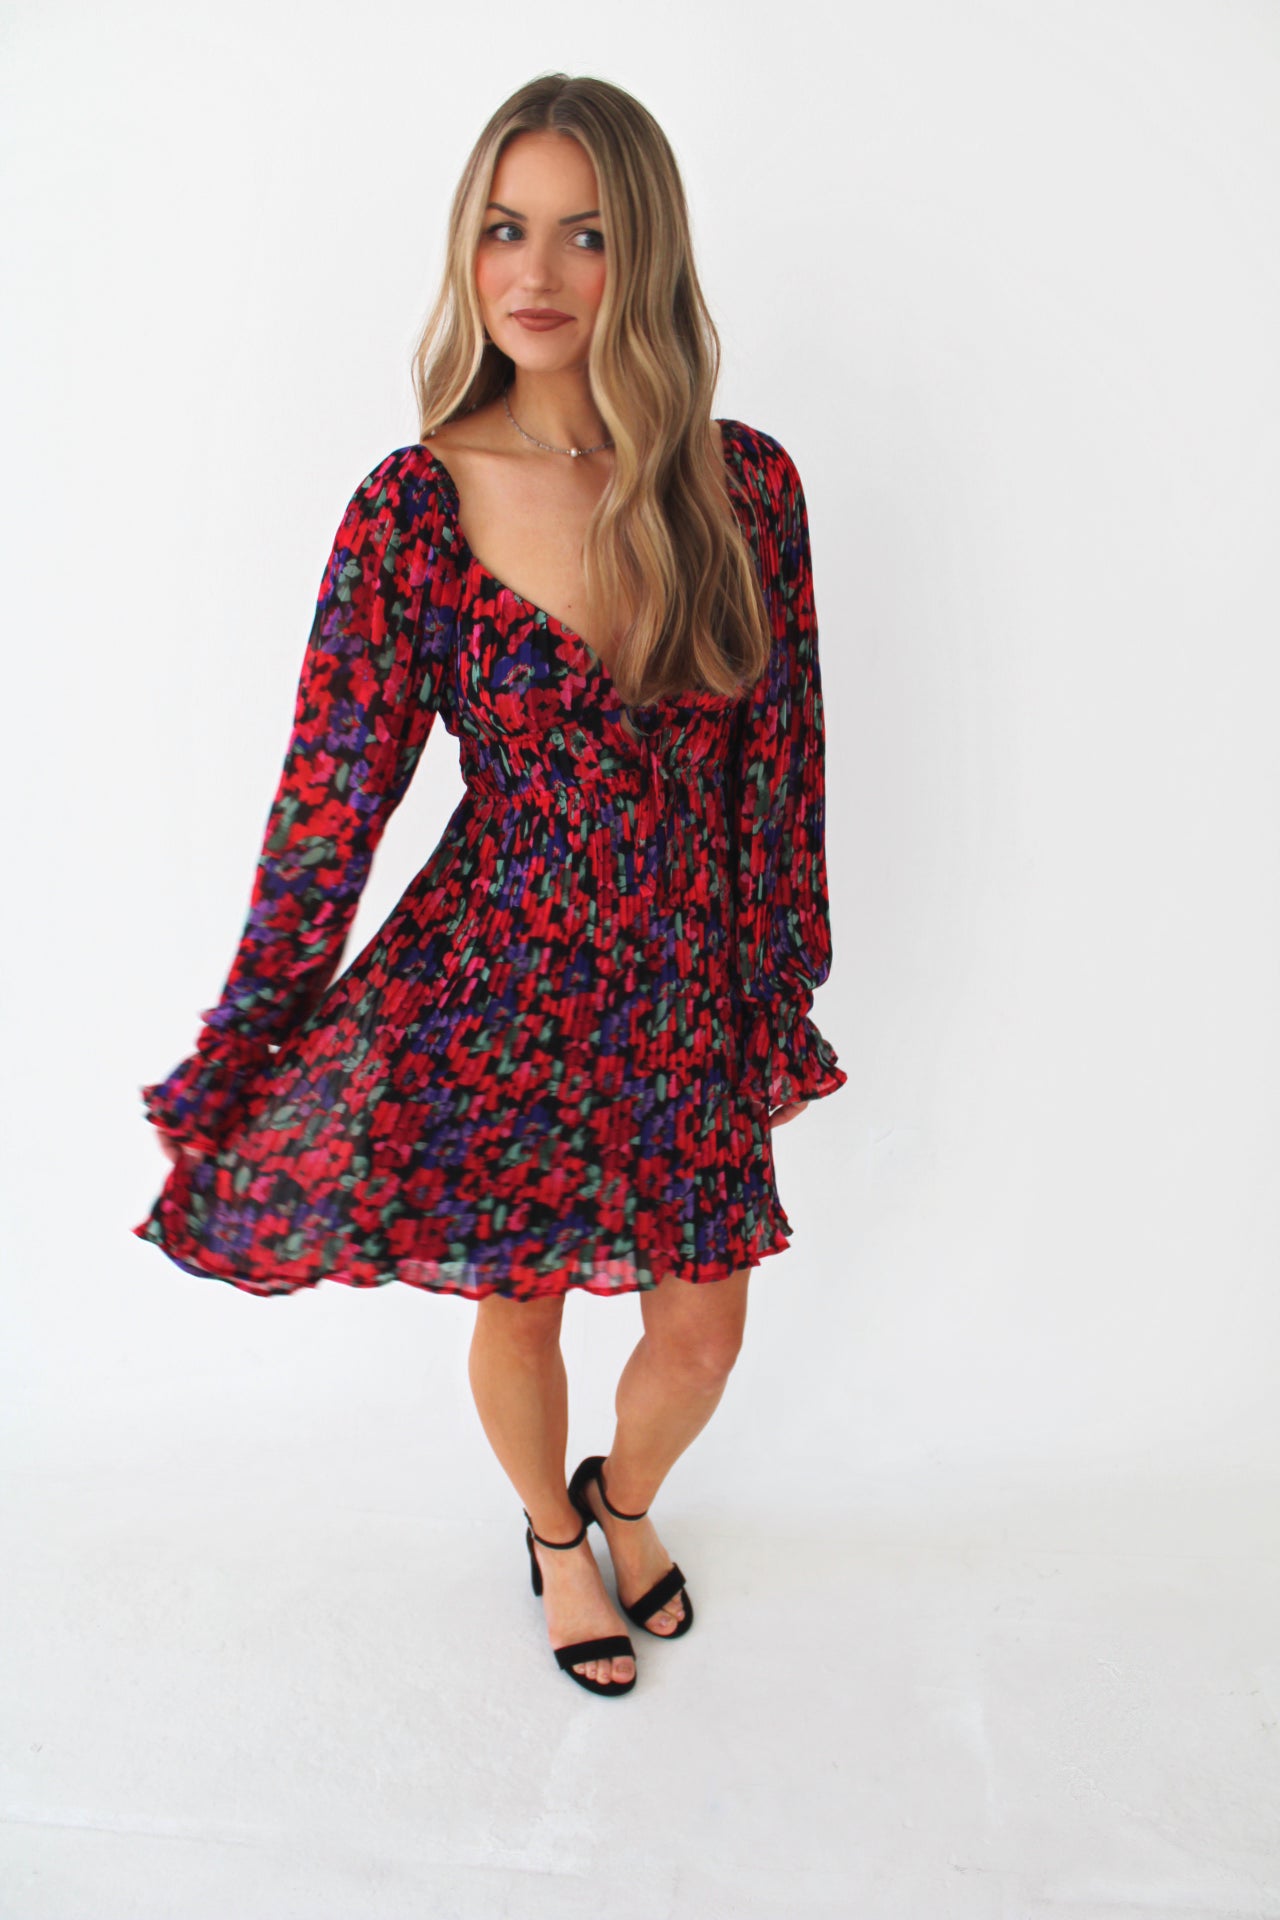 Always Yours Floral Dress